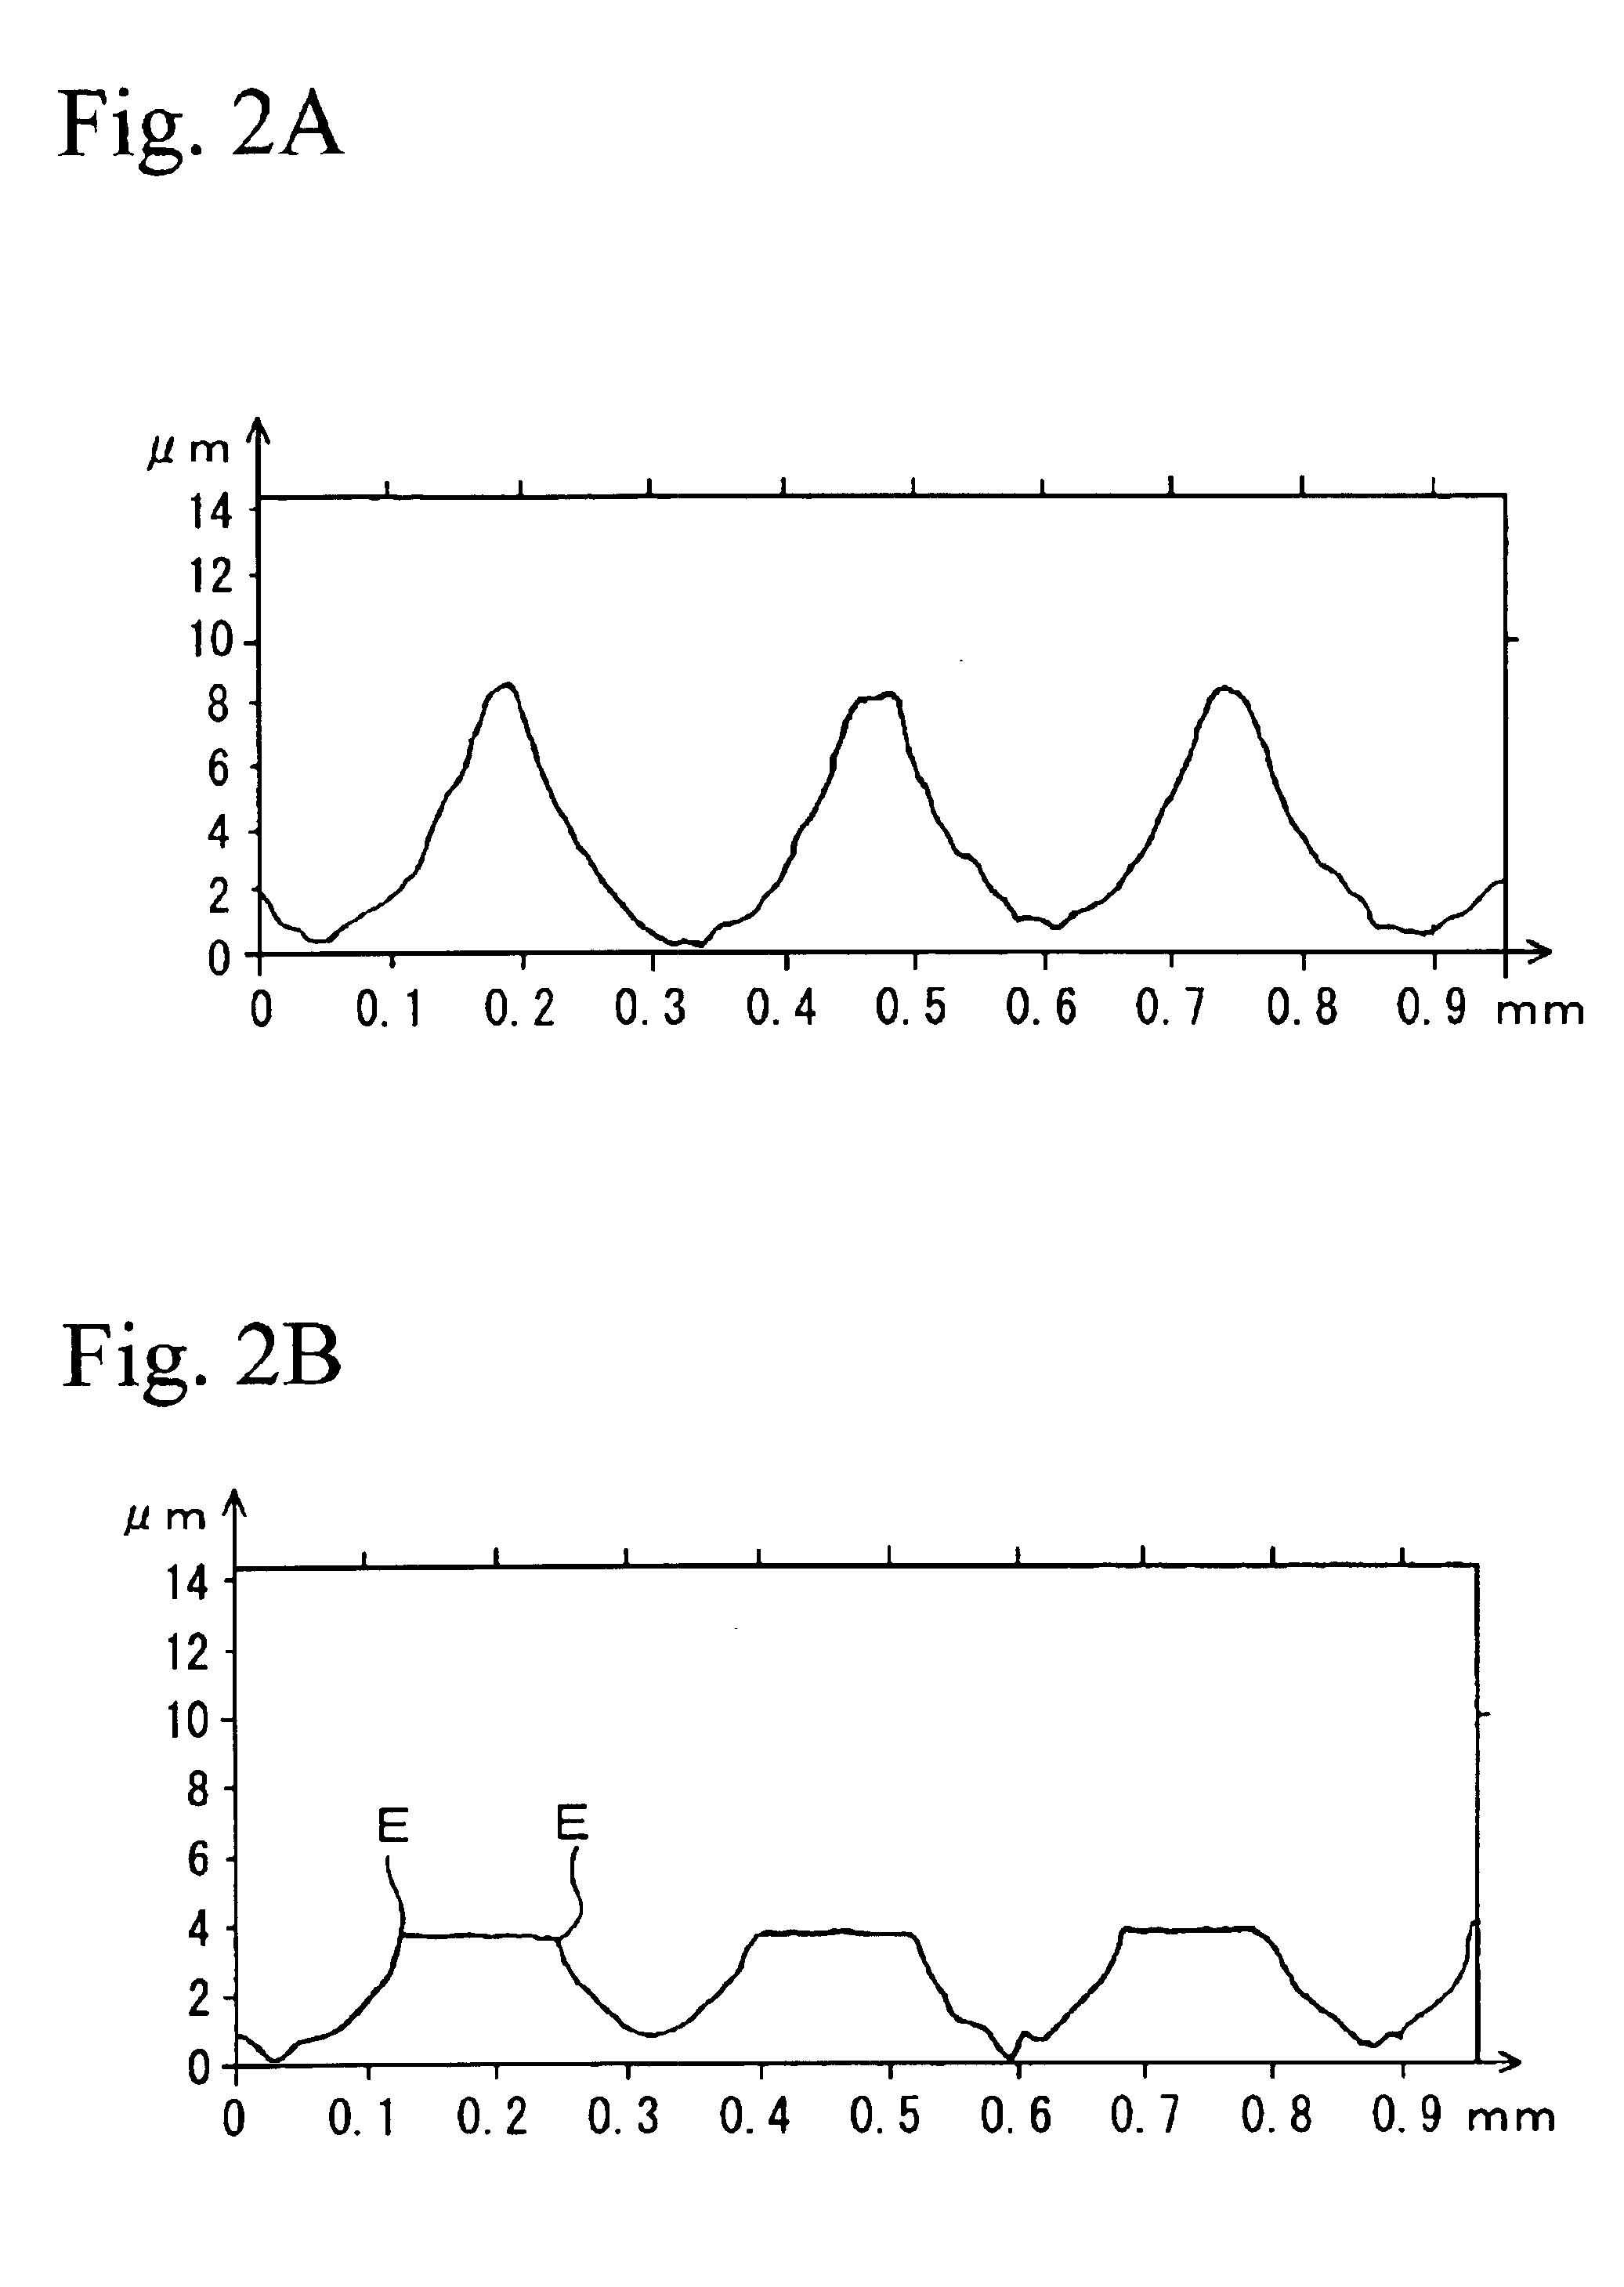 Metallic sliding member, piston for internal combustion engine, method of surface treating these, and apparatus therefor